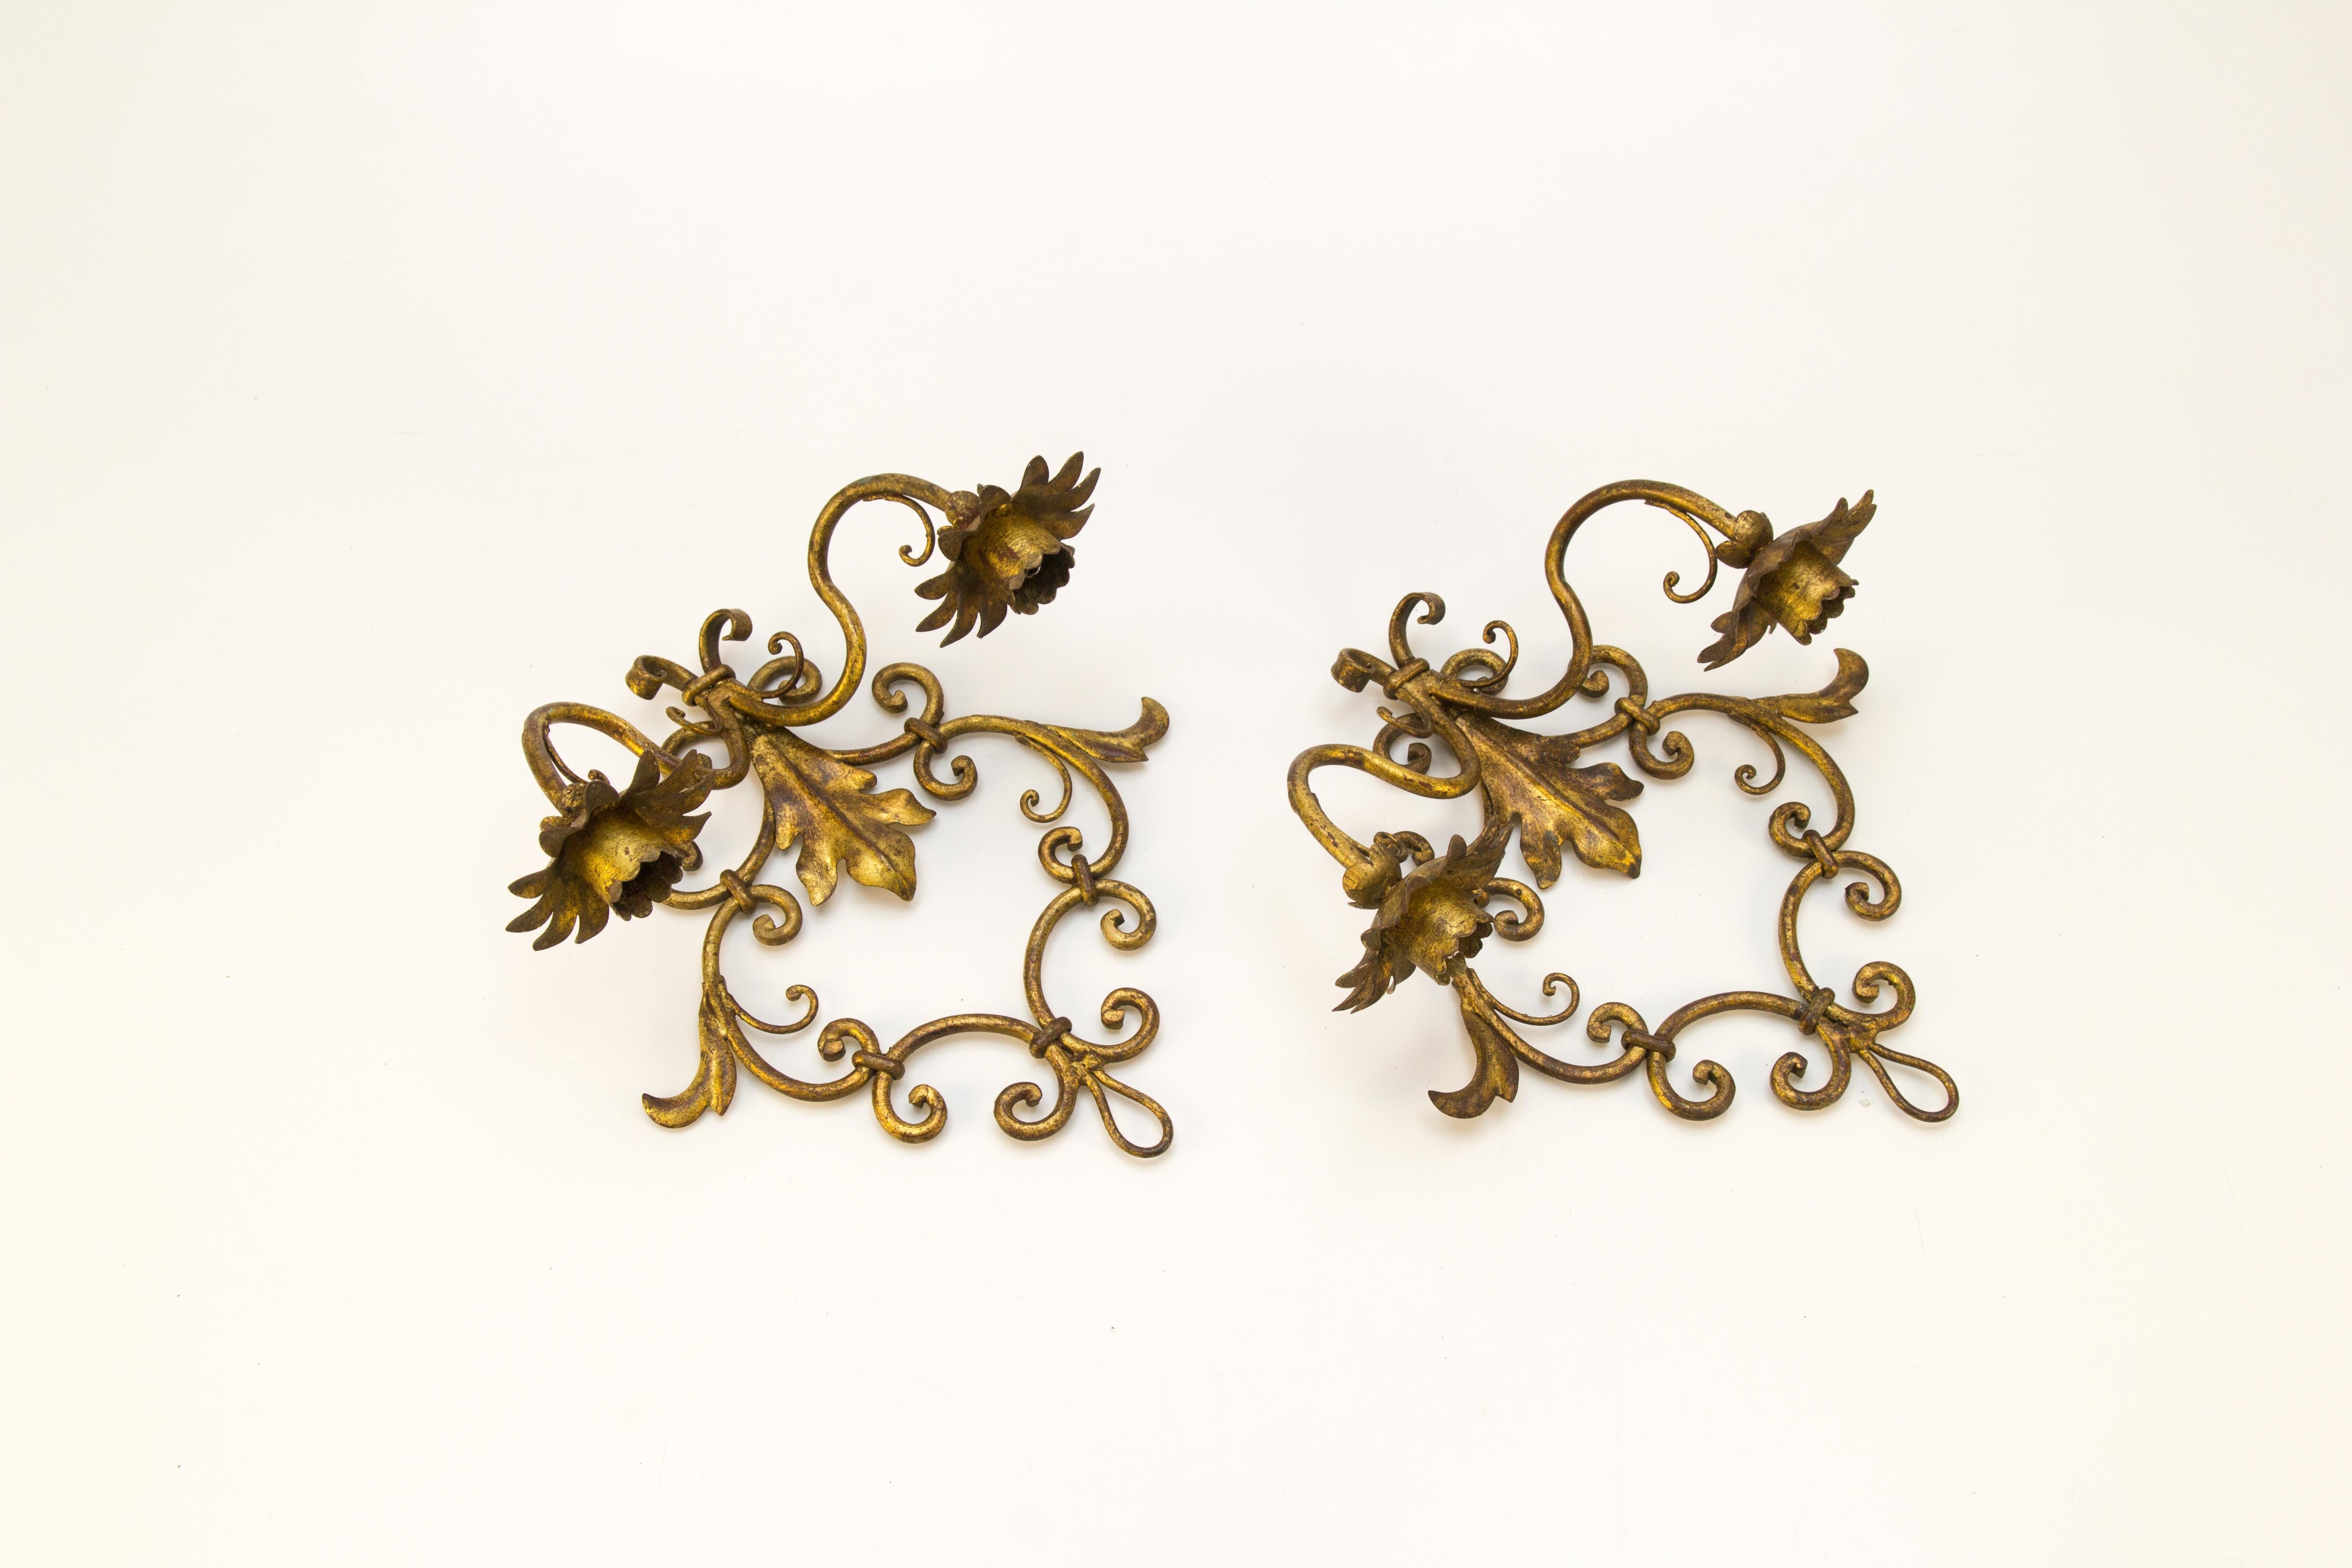 Pair of Italian Hollywood Regency Style Gilt Metal Candle Wall Sconces For Sale 1